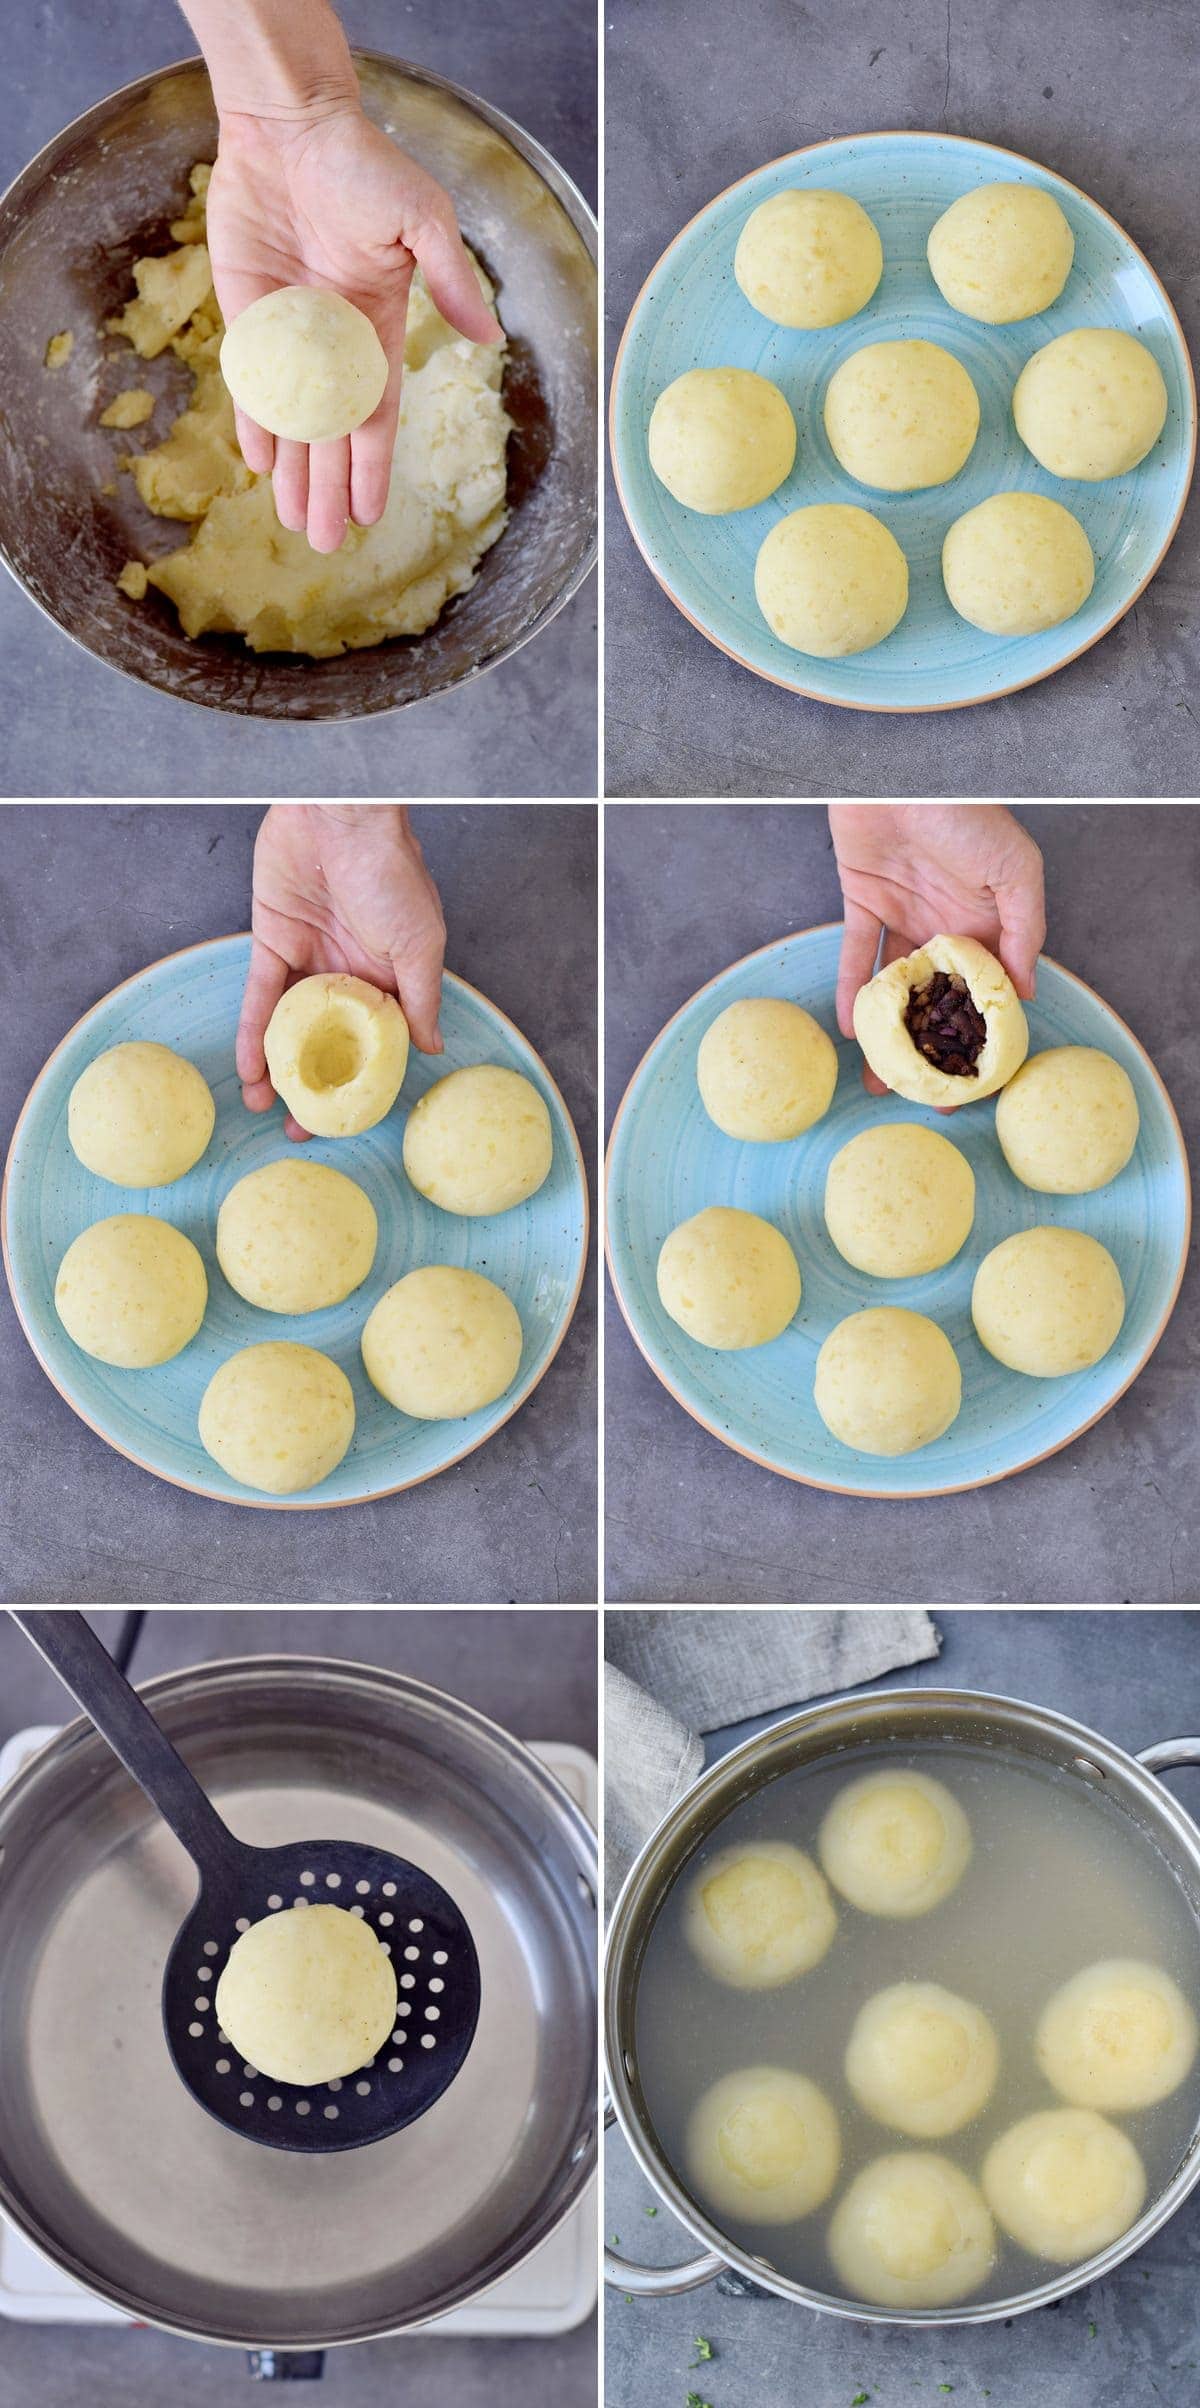 6 step-by-step photos showing how to shape and cook potato dumplings